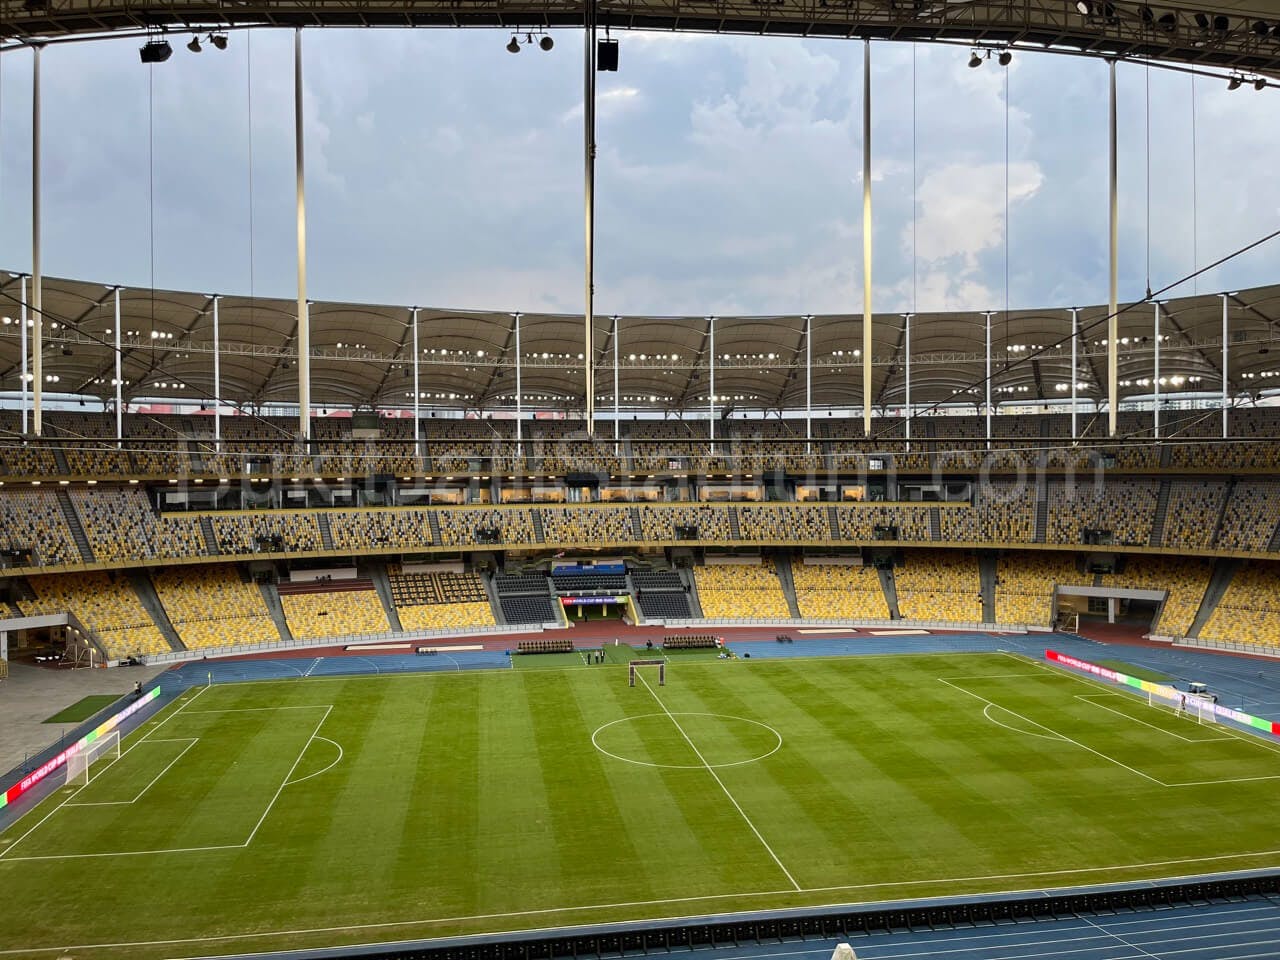 1x View of Bukit Jalil field from section 315 of Stadium Bukit Jalil.